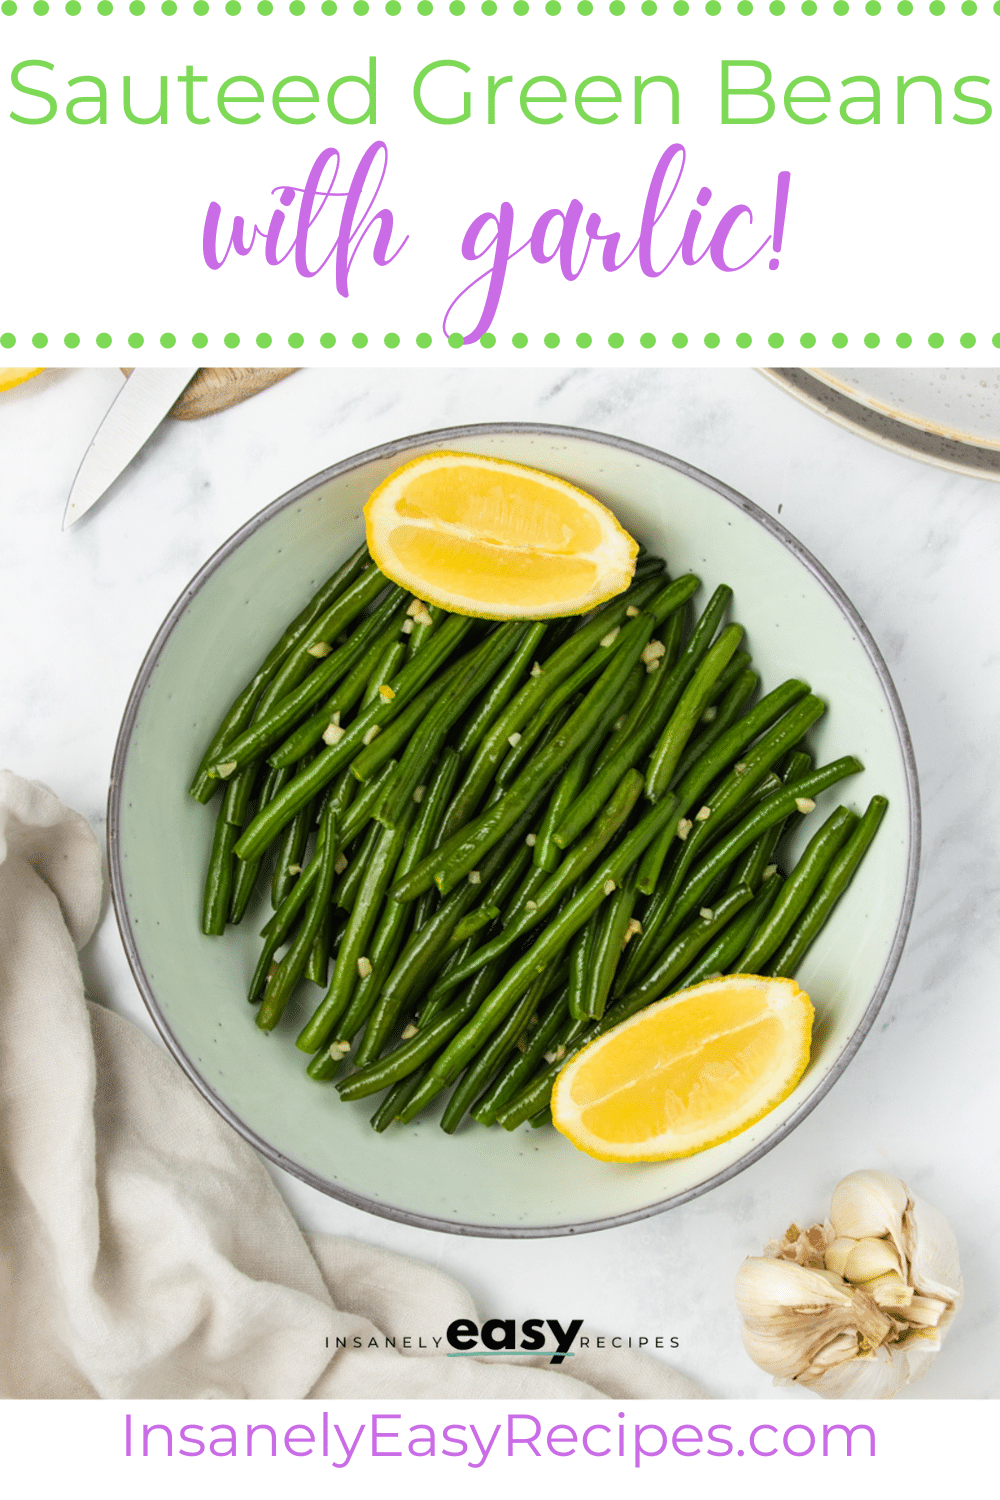 a serving bowl filled with green beans. Text overlay says "sauteed green beans with garlic!"